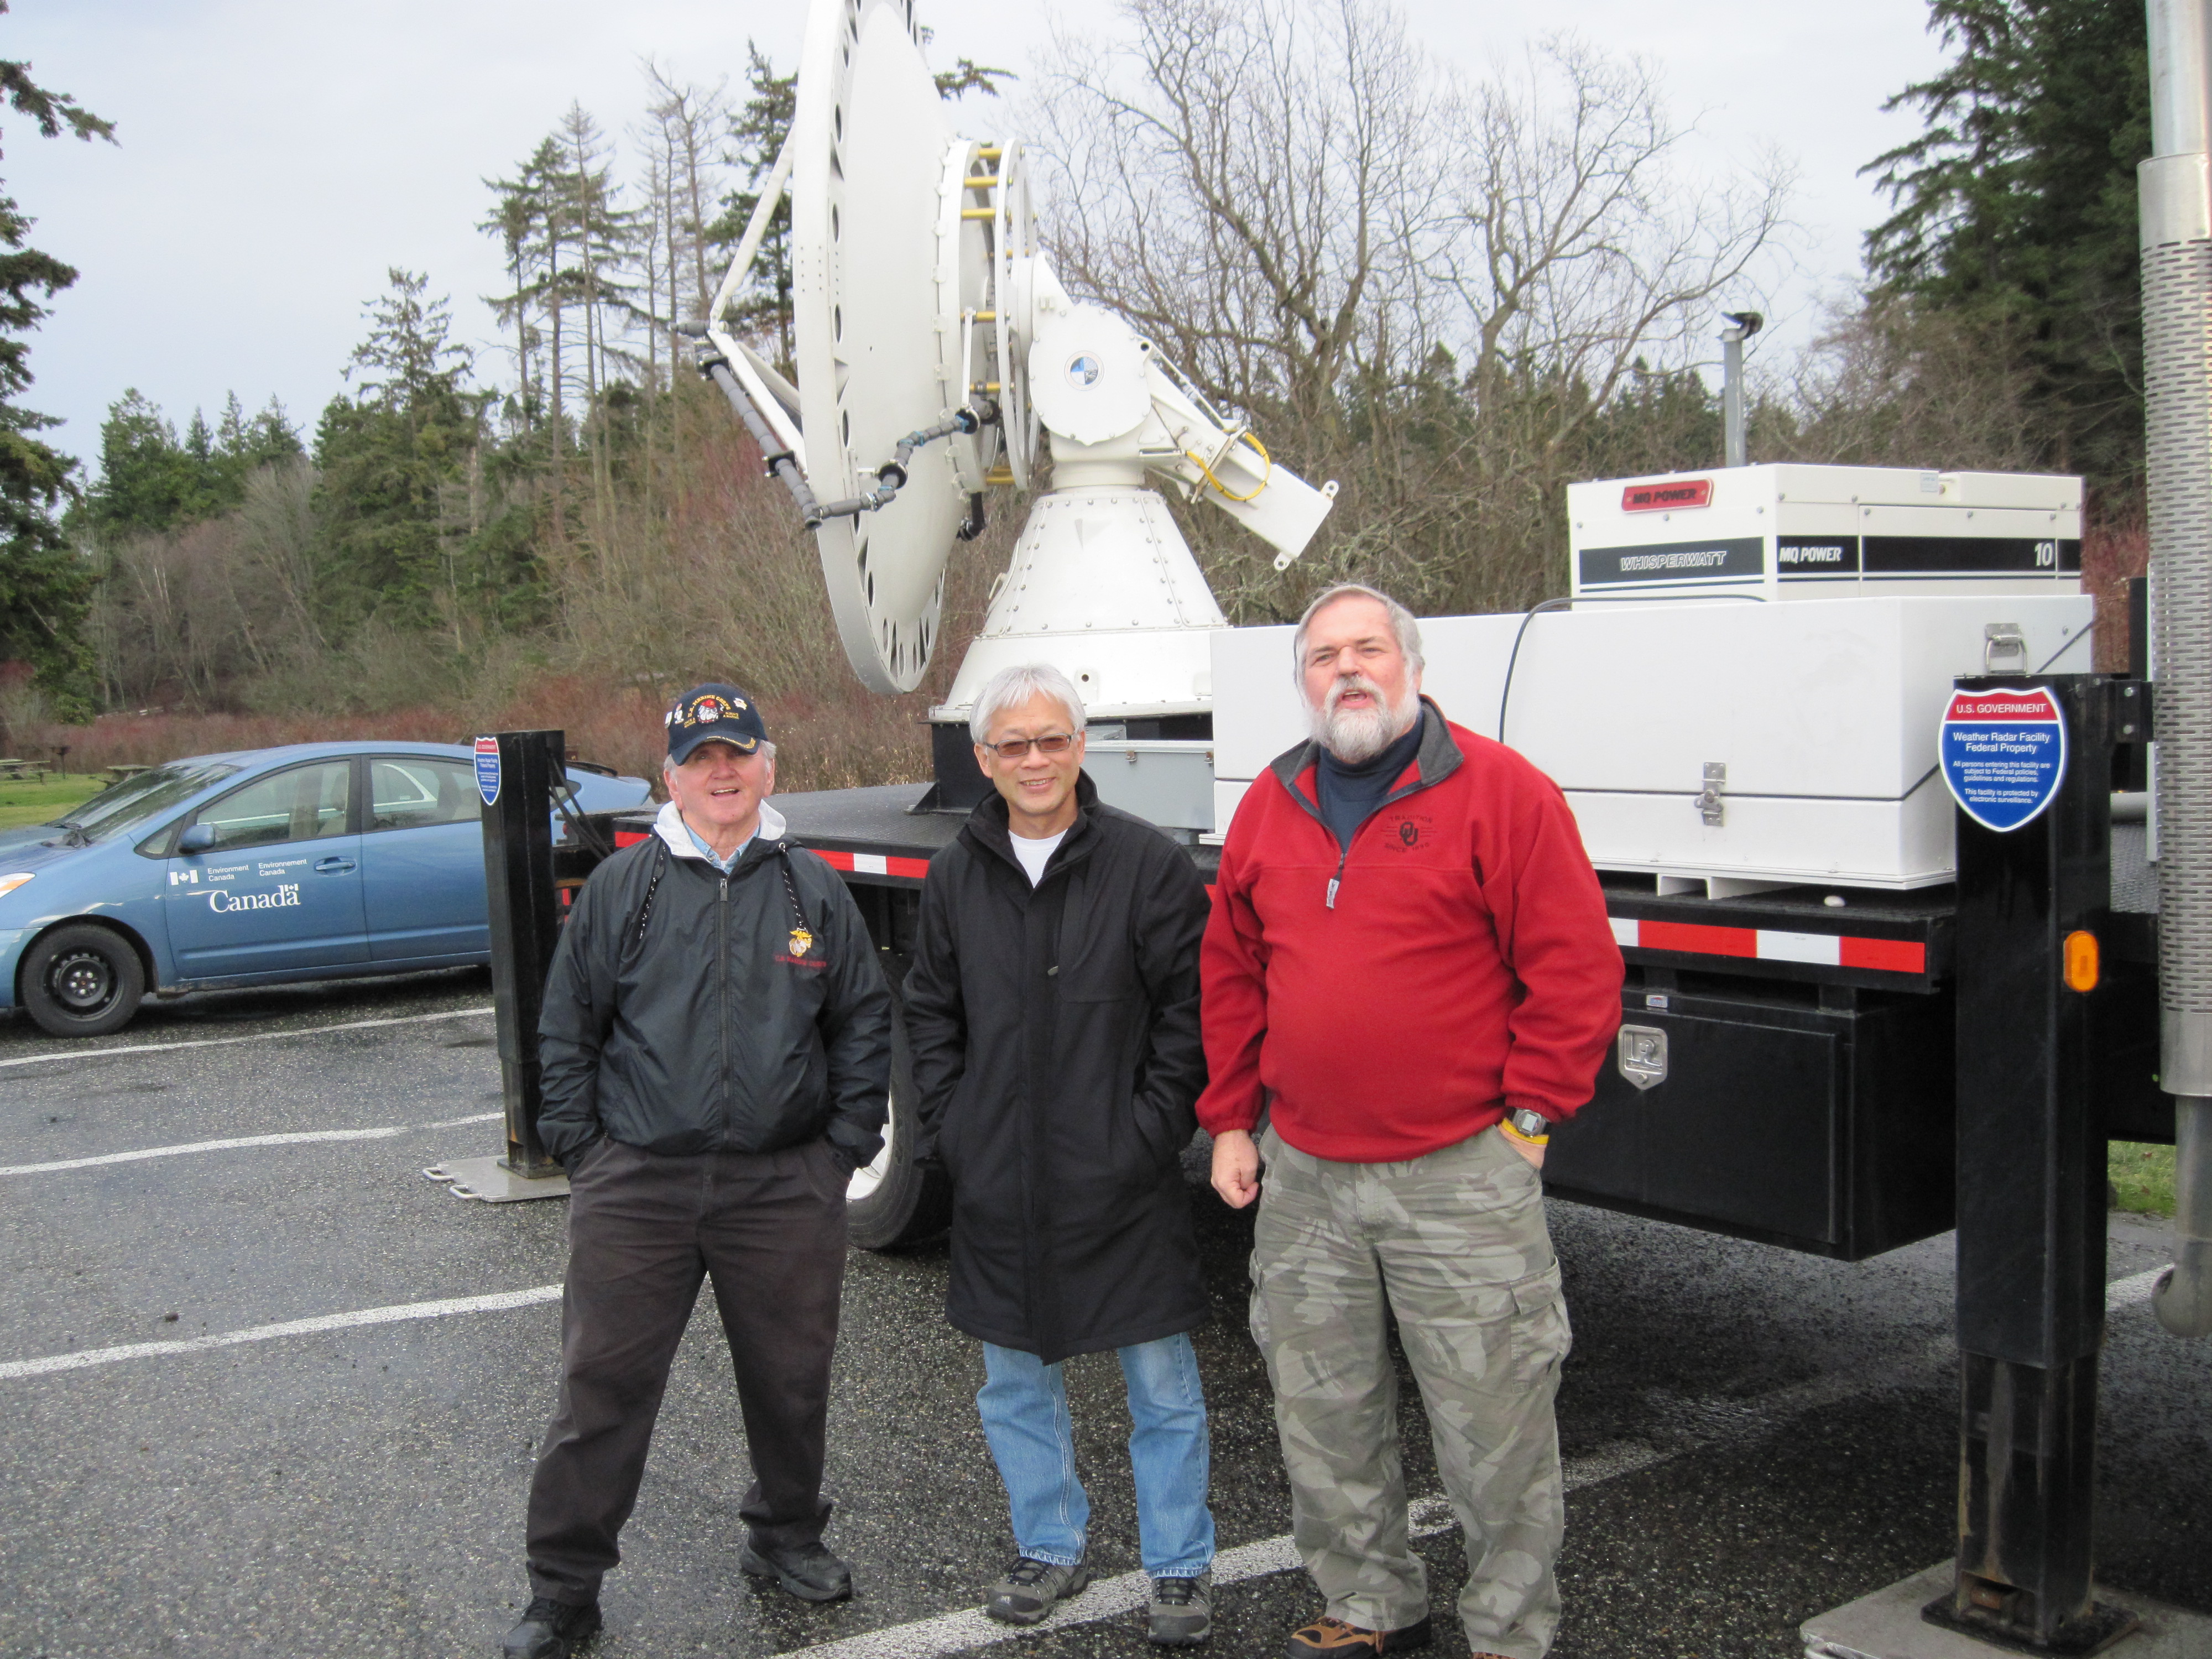 NSSL's mobile radar team goes to the Olympics